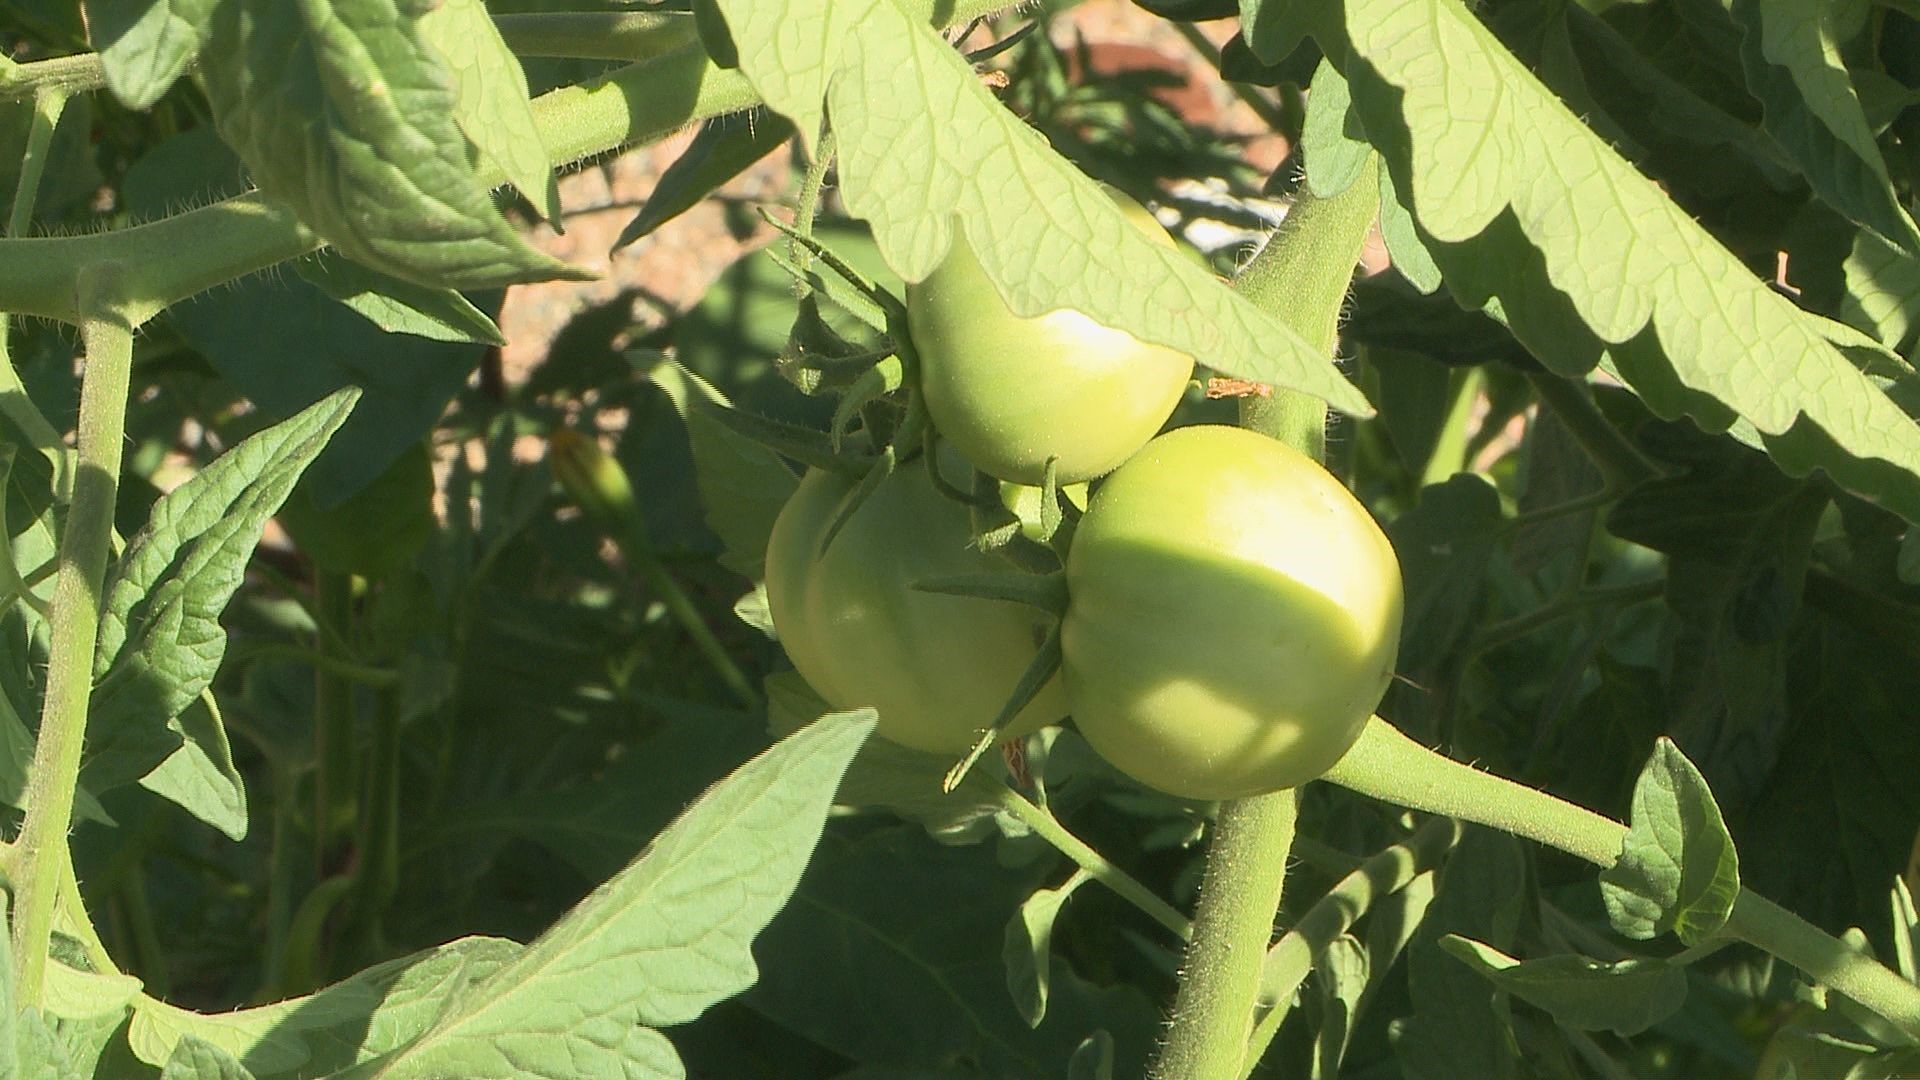 Even with the August heat, you can have a vegetable garden that flourishes.